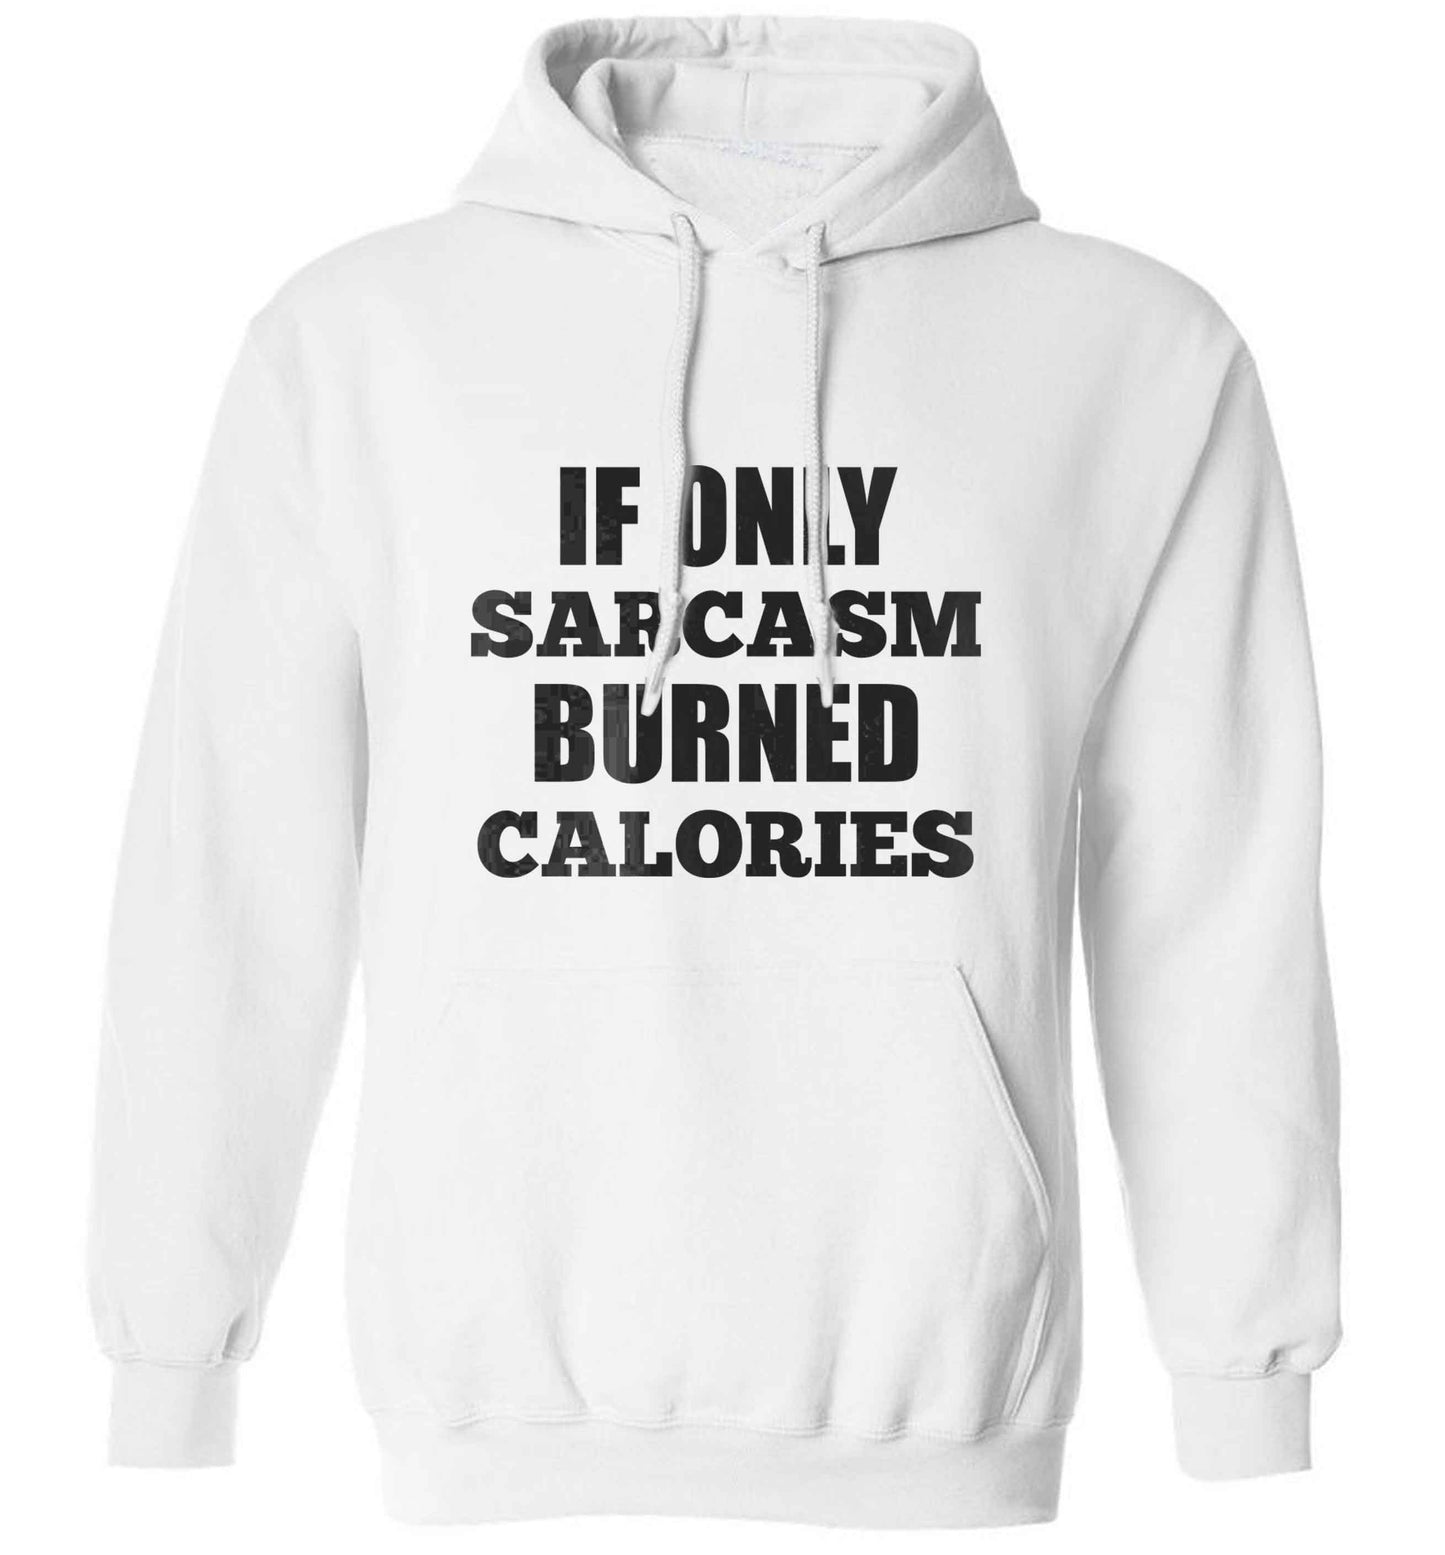 If only sarcasm burned calories adults unisex white hoodie 2XL